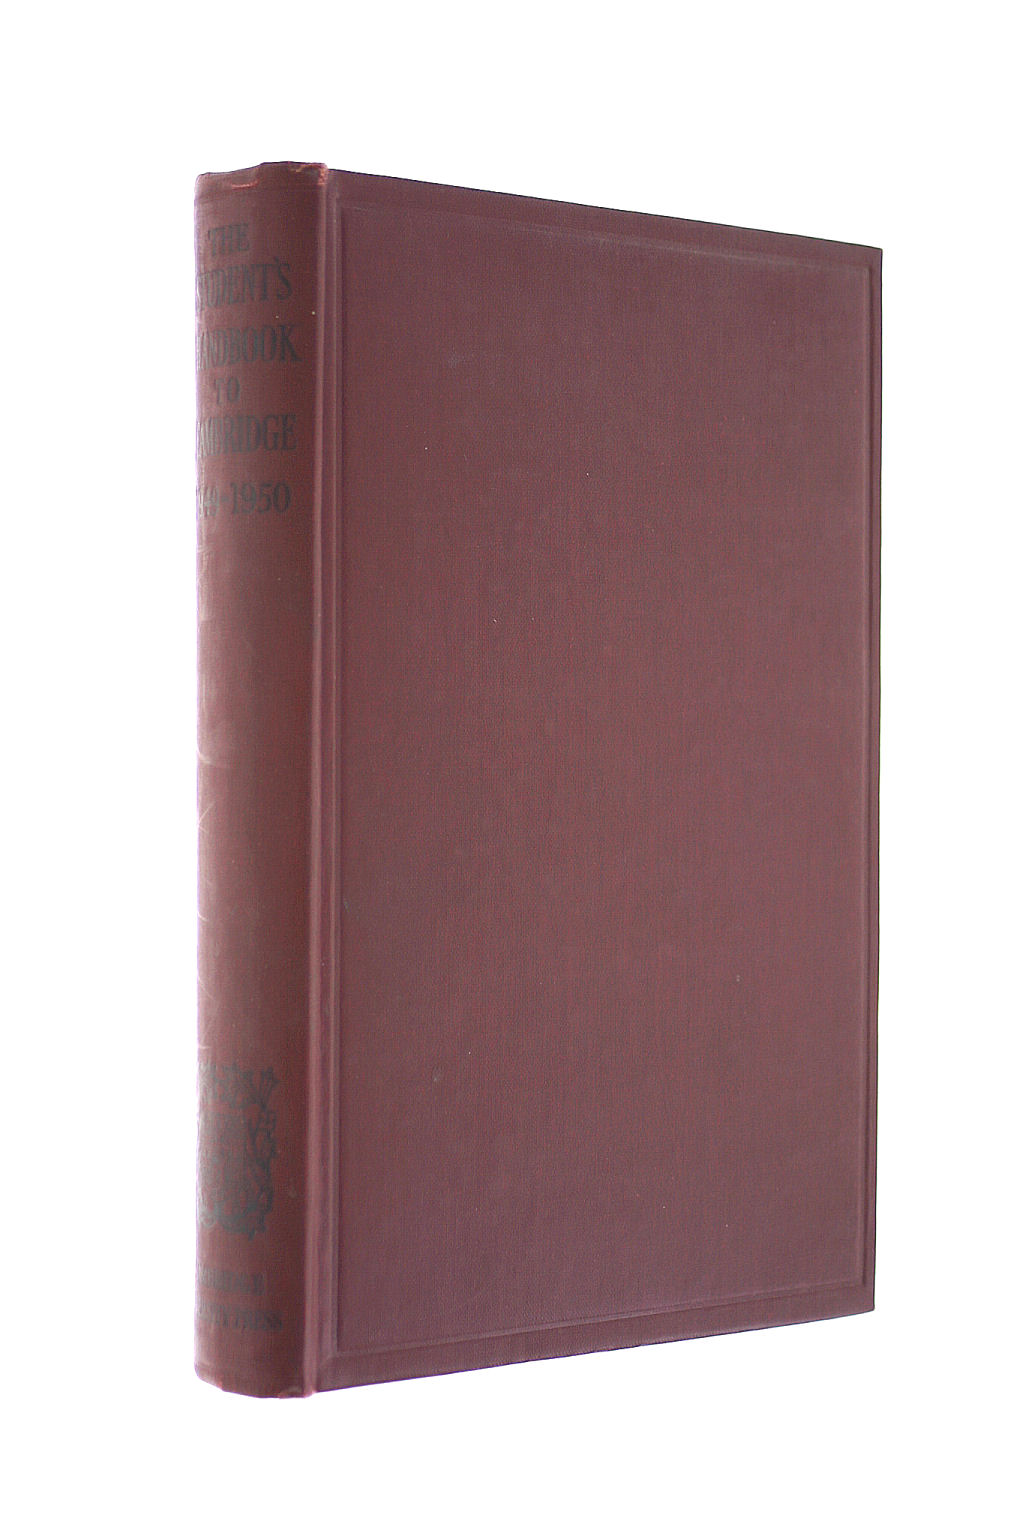 ANON - The Student's Handbook to the University and Colleges of Cambridge, revised to 30 June 1949.